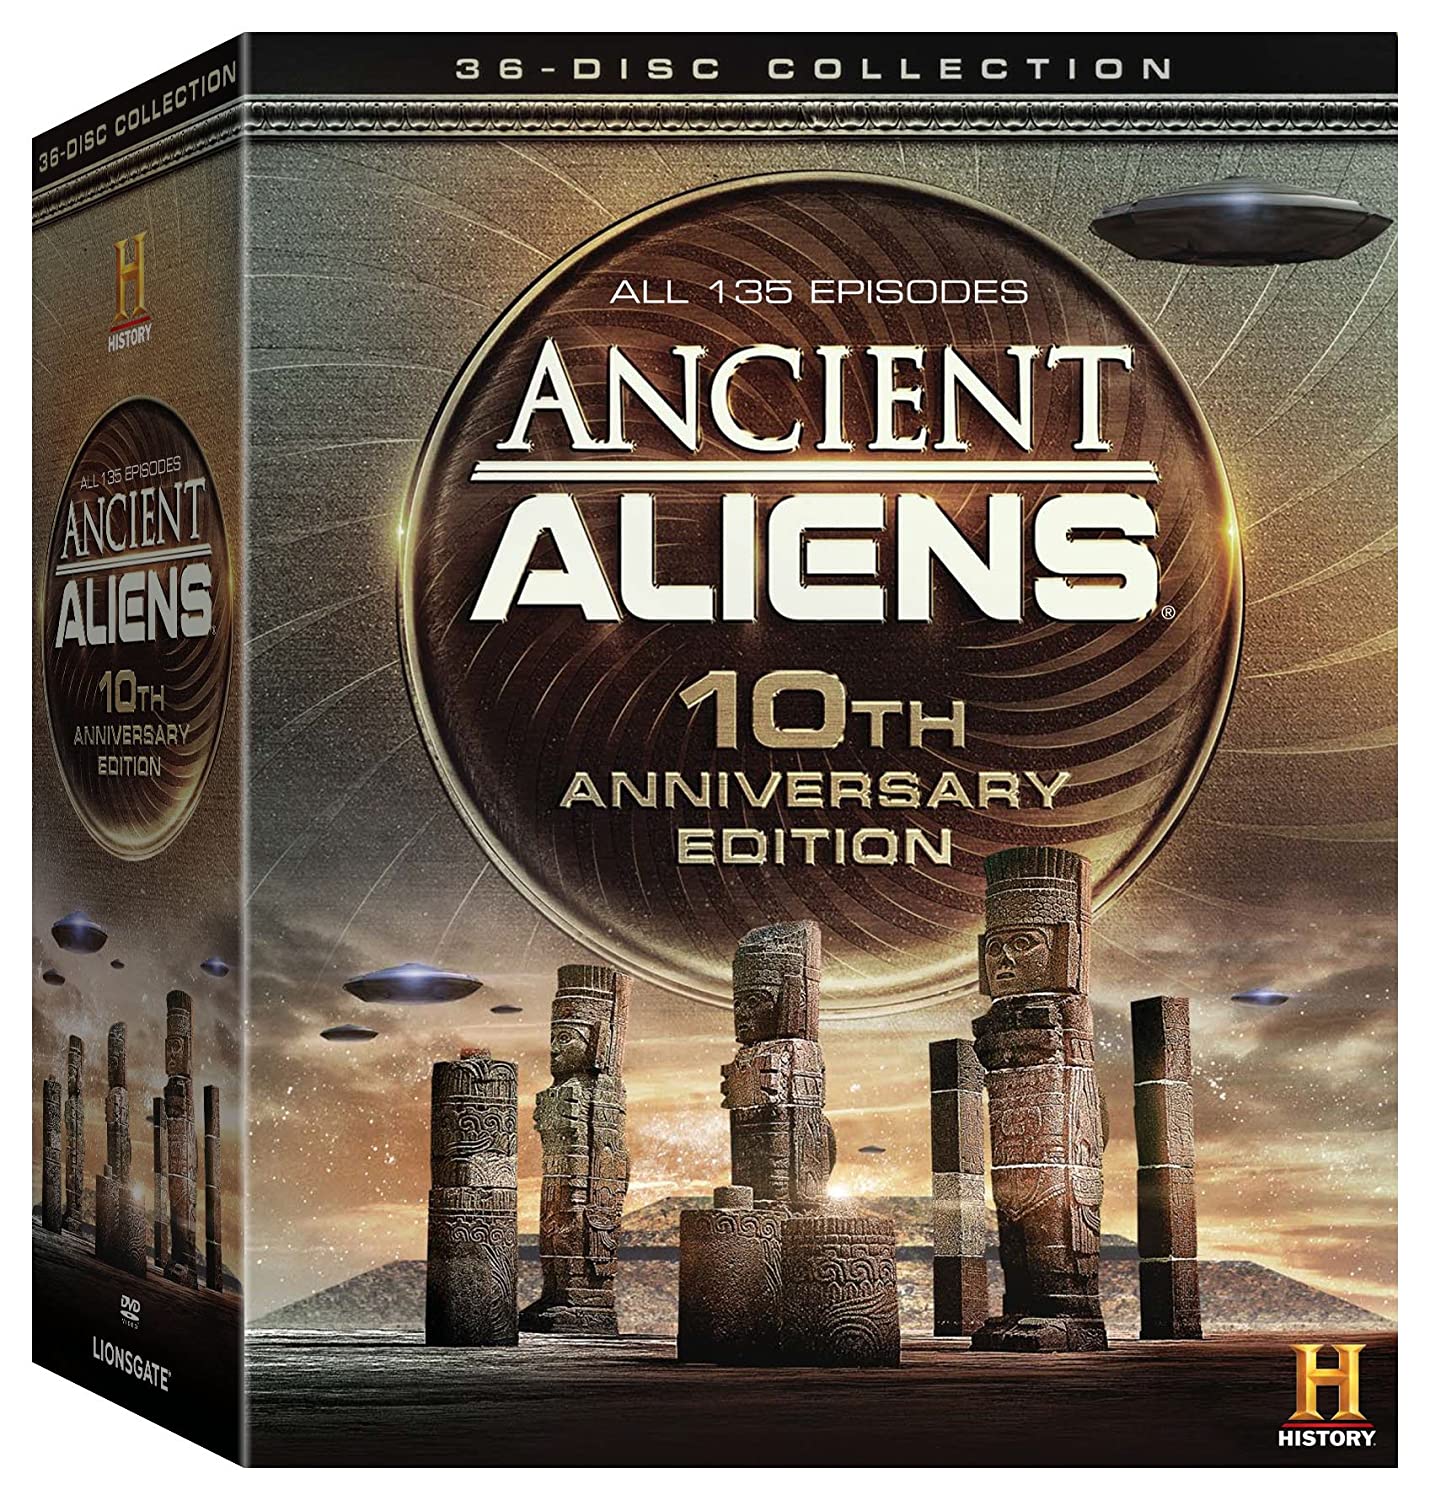 Ancient Aliens: Complete Series (Box Set) - DVD [ 2018 ]  - Sci Fi Movies On DVD - Movies On GRUV